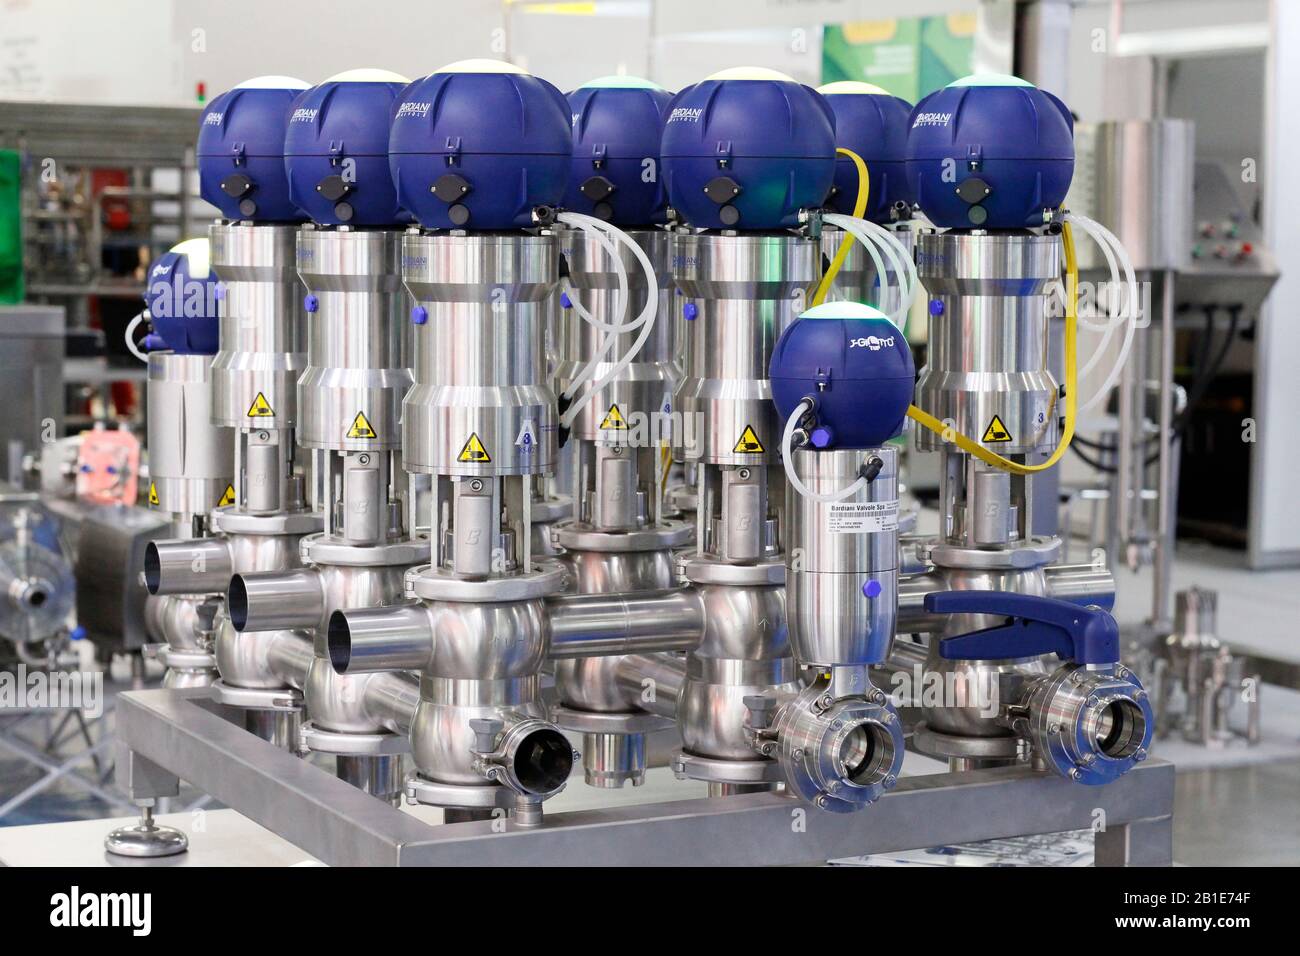 Moscow, RF, 02.20.2020: Valves for use in the food, dairy, chemical, pharmaceutical industries. Valves for the food industry Two-seat valve aseptic di Stock Photo